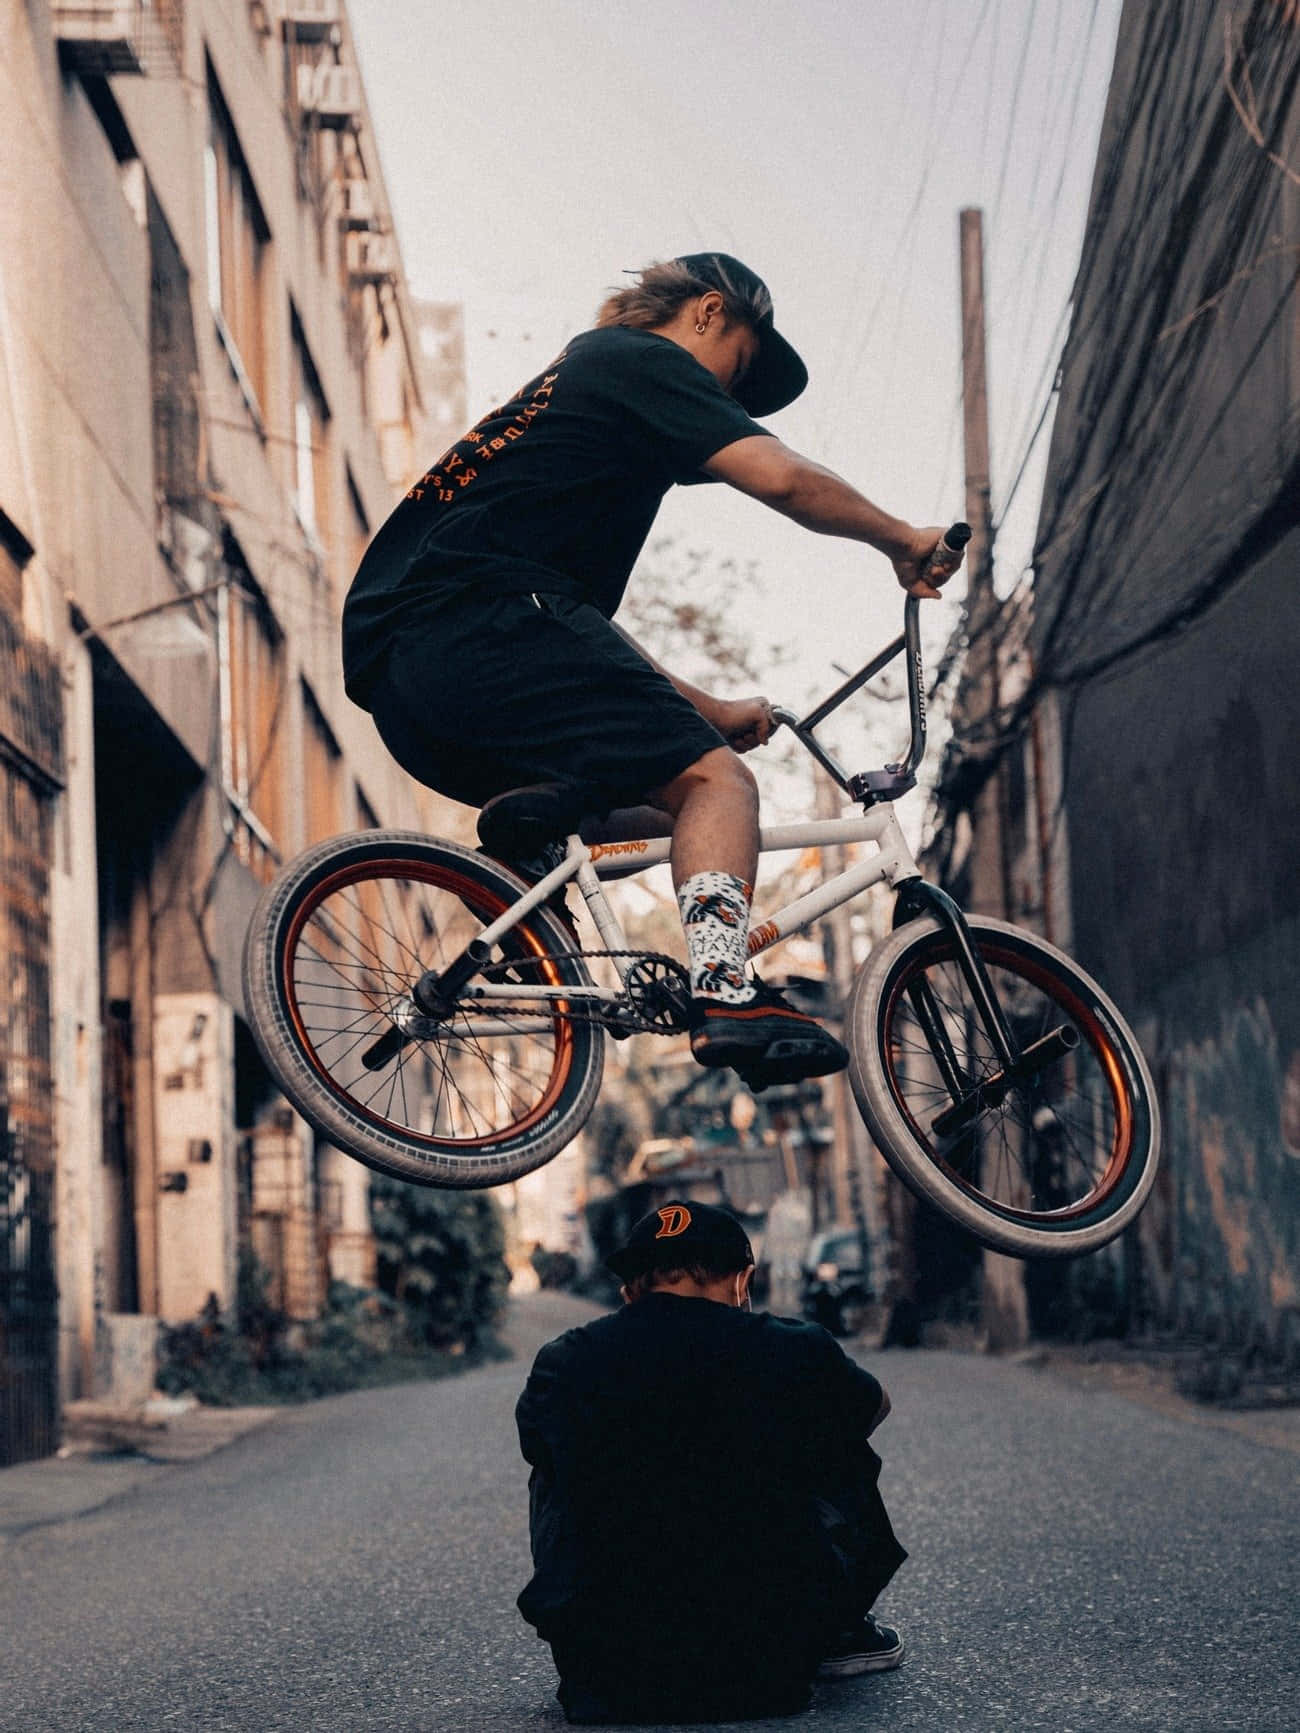 500 Bmx Pictures HD  Download Free Images on Unsplash